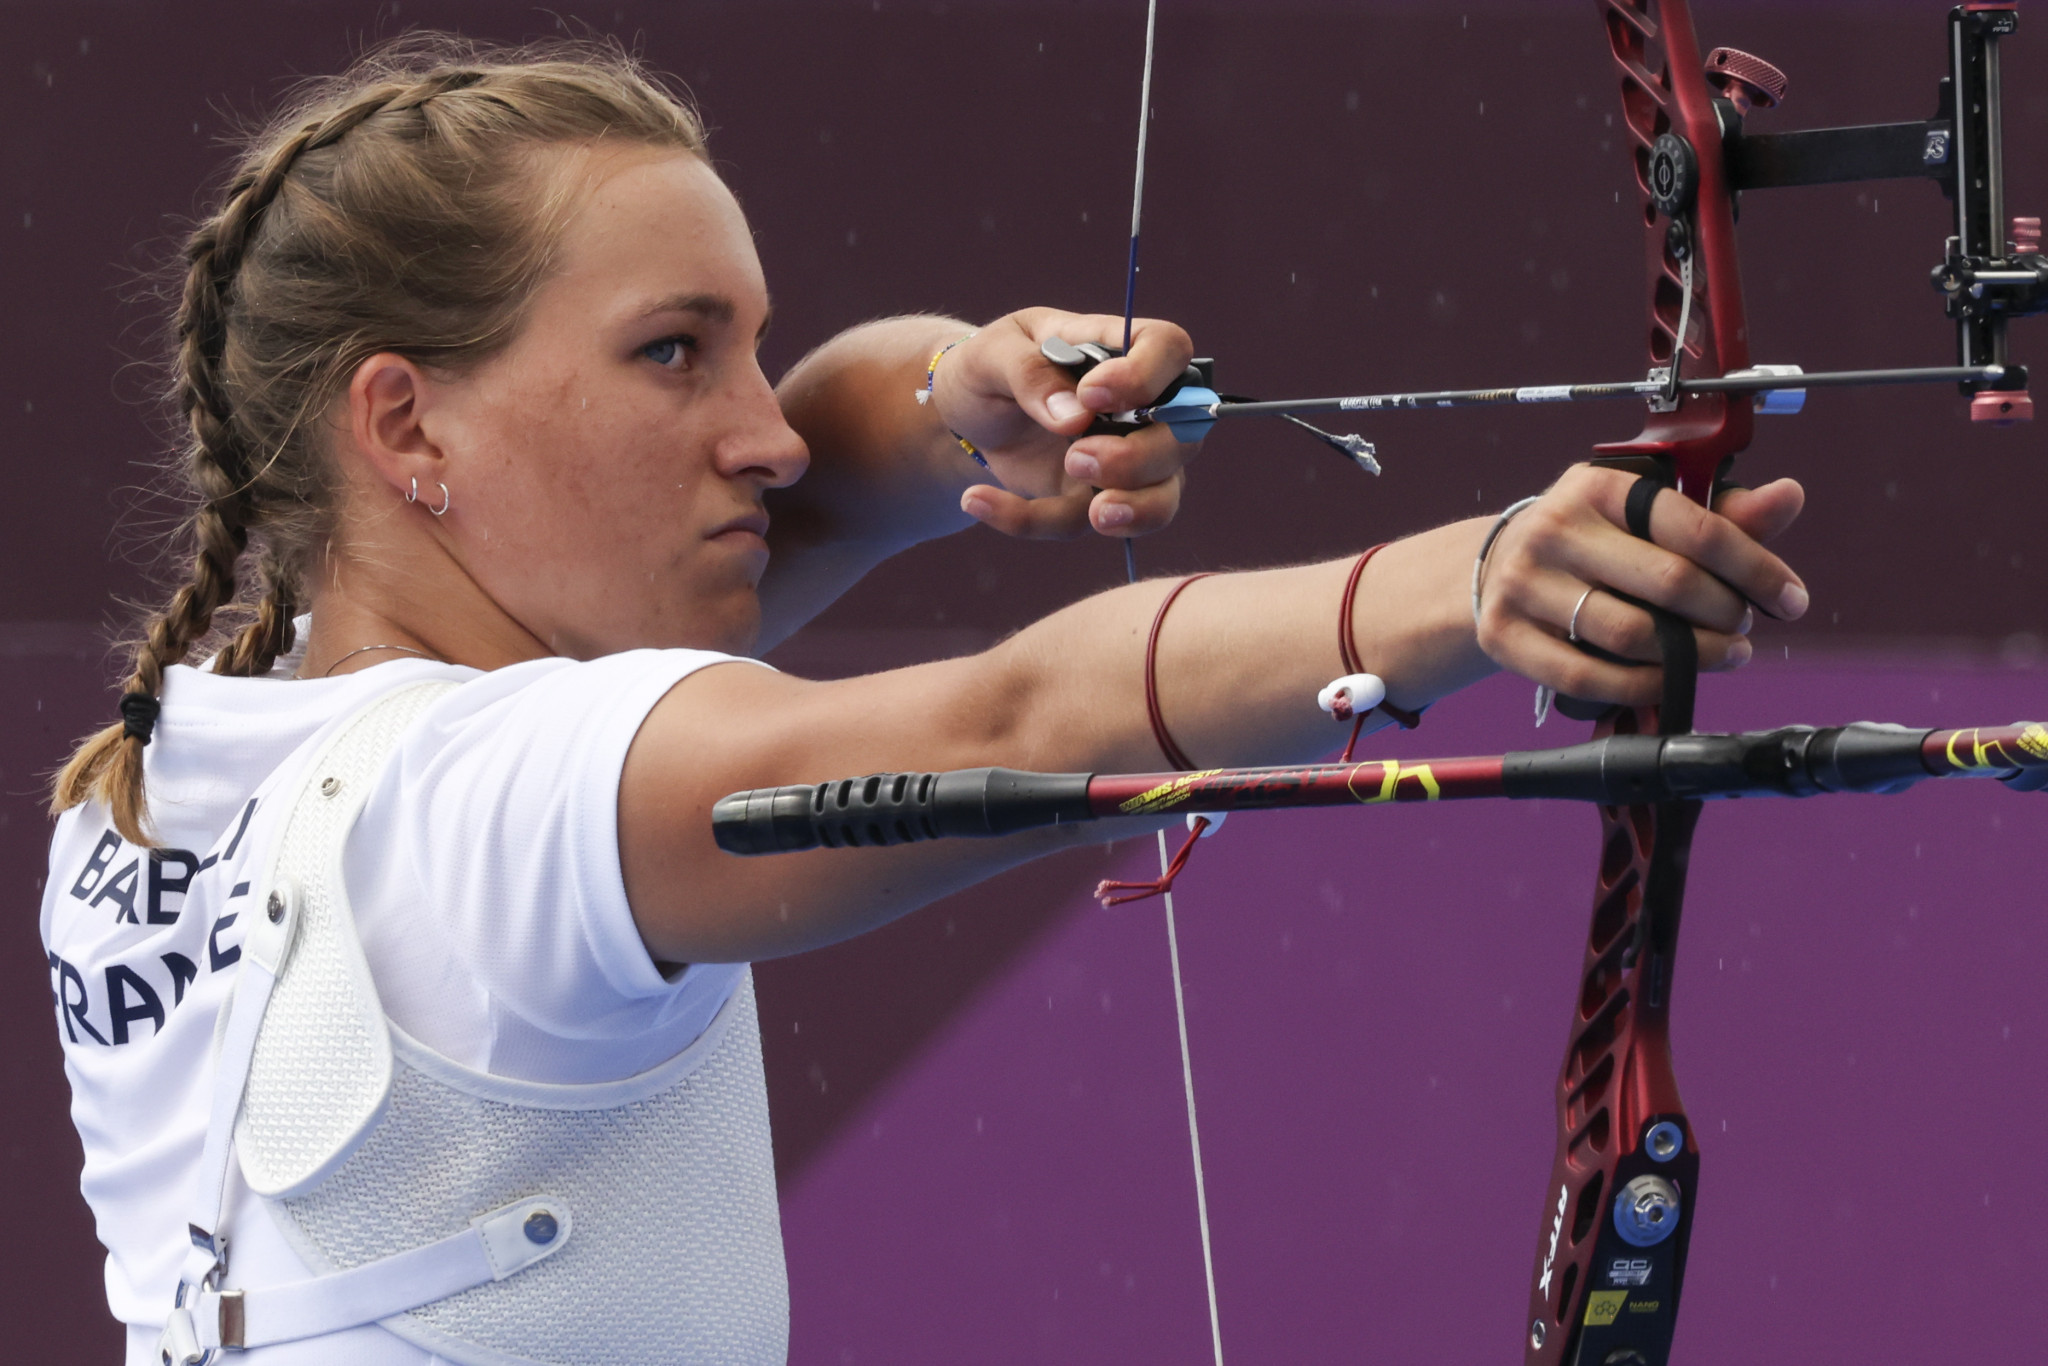 France's Lisa Barbelin will contest the women's recurve final in Laško against Italy's Vanessa Landi ©Getty Images